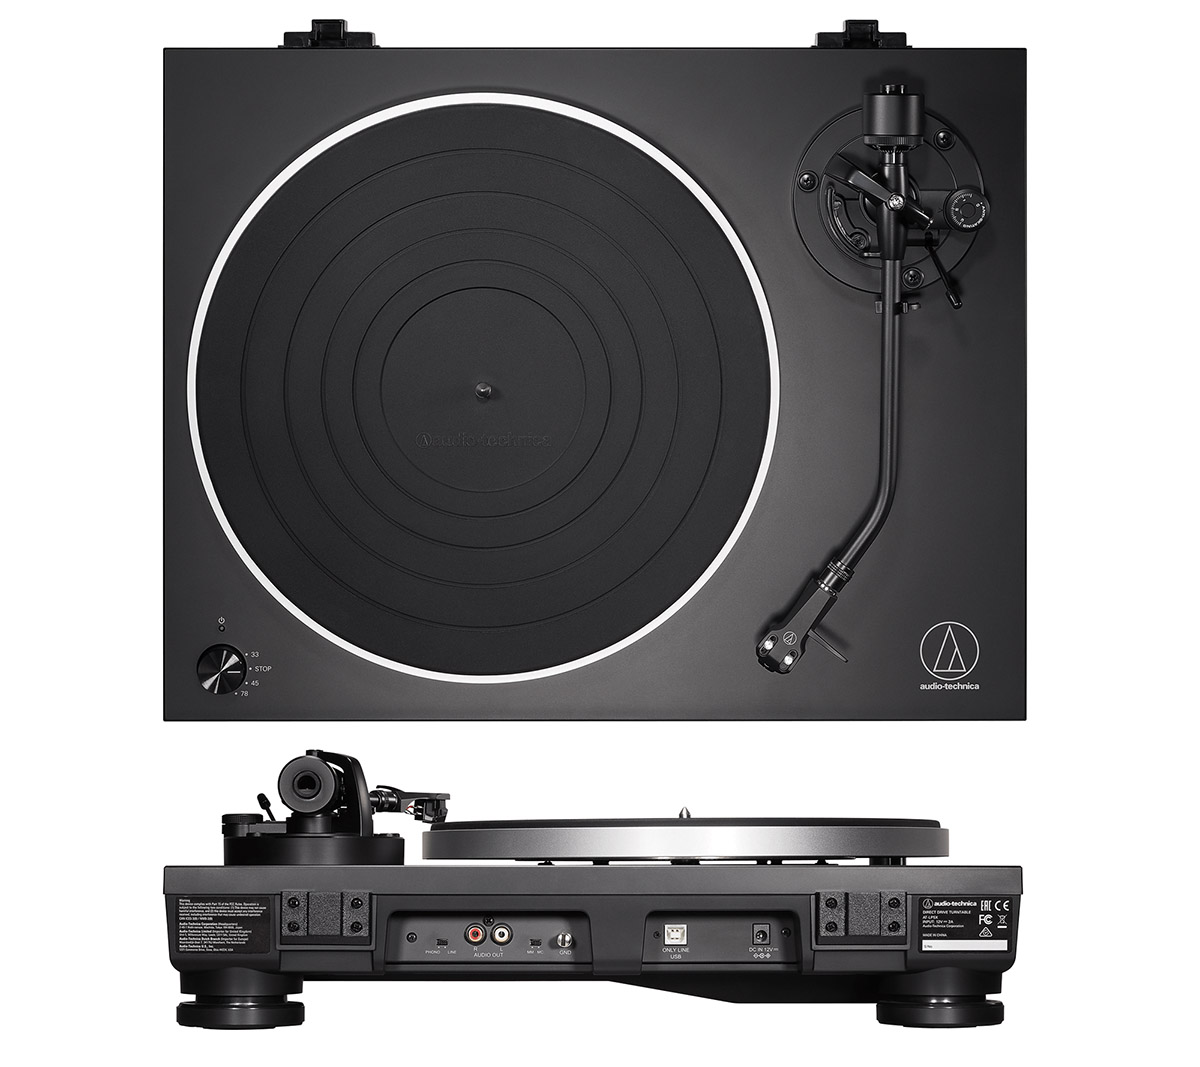 Audio-Technica Introduces Upgraded Entry-Level AT-LP5X Turntable